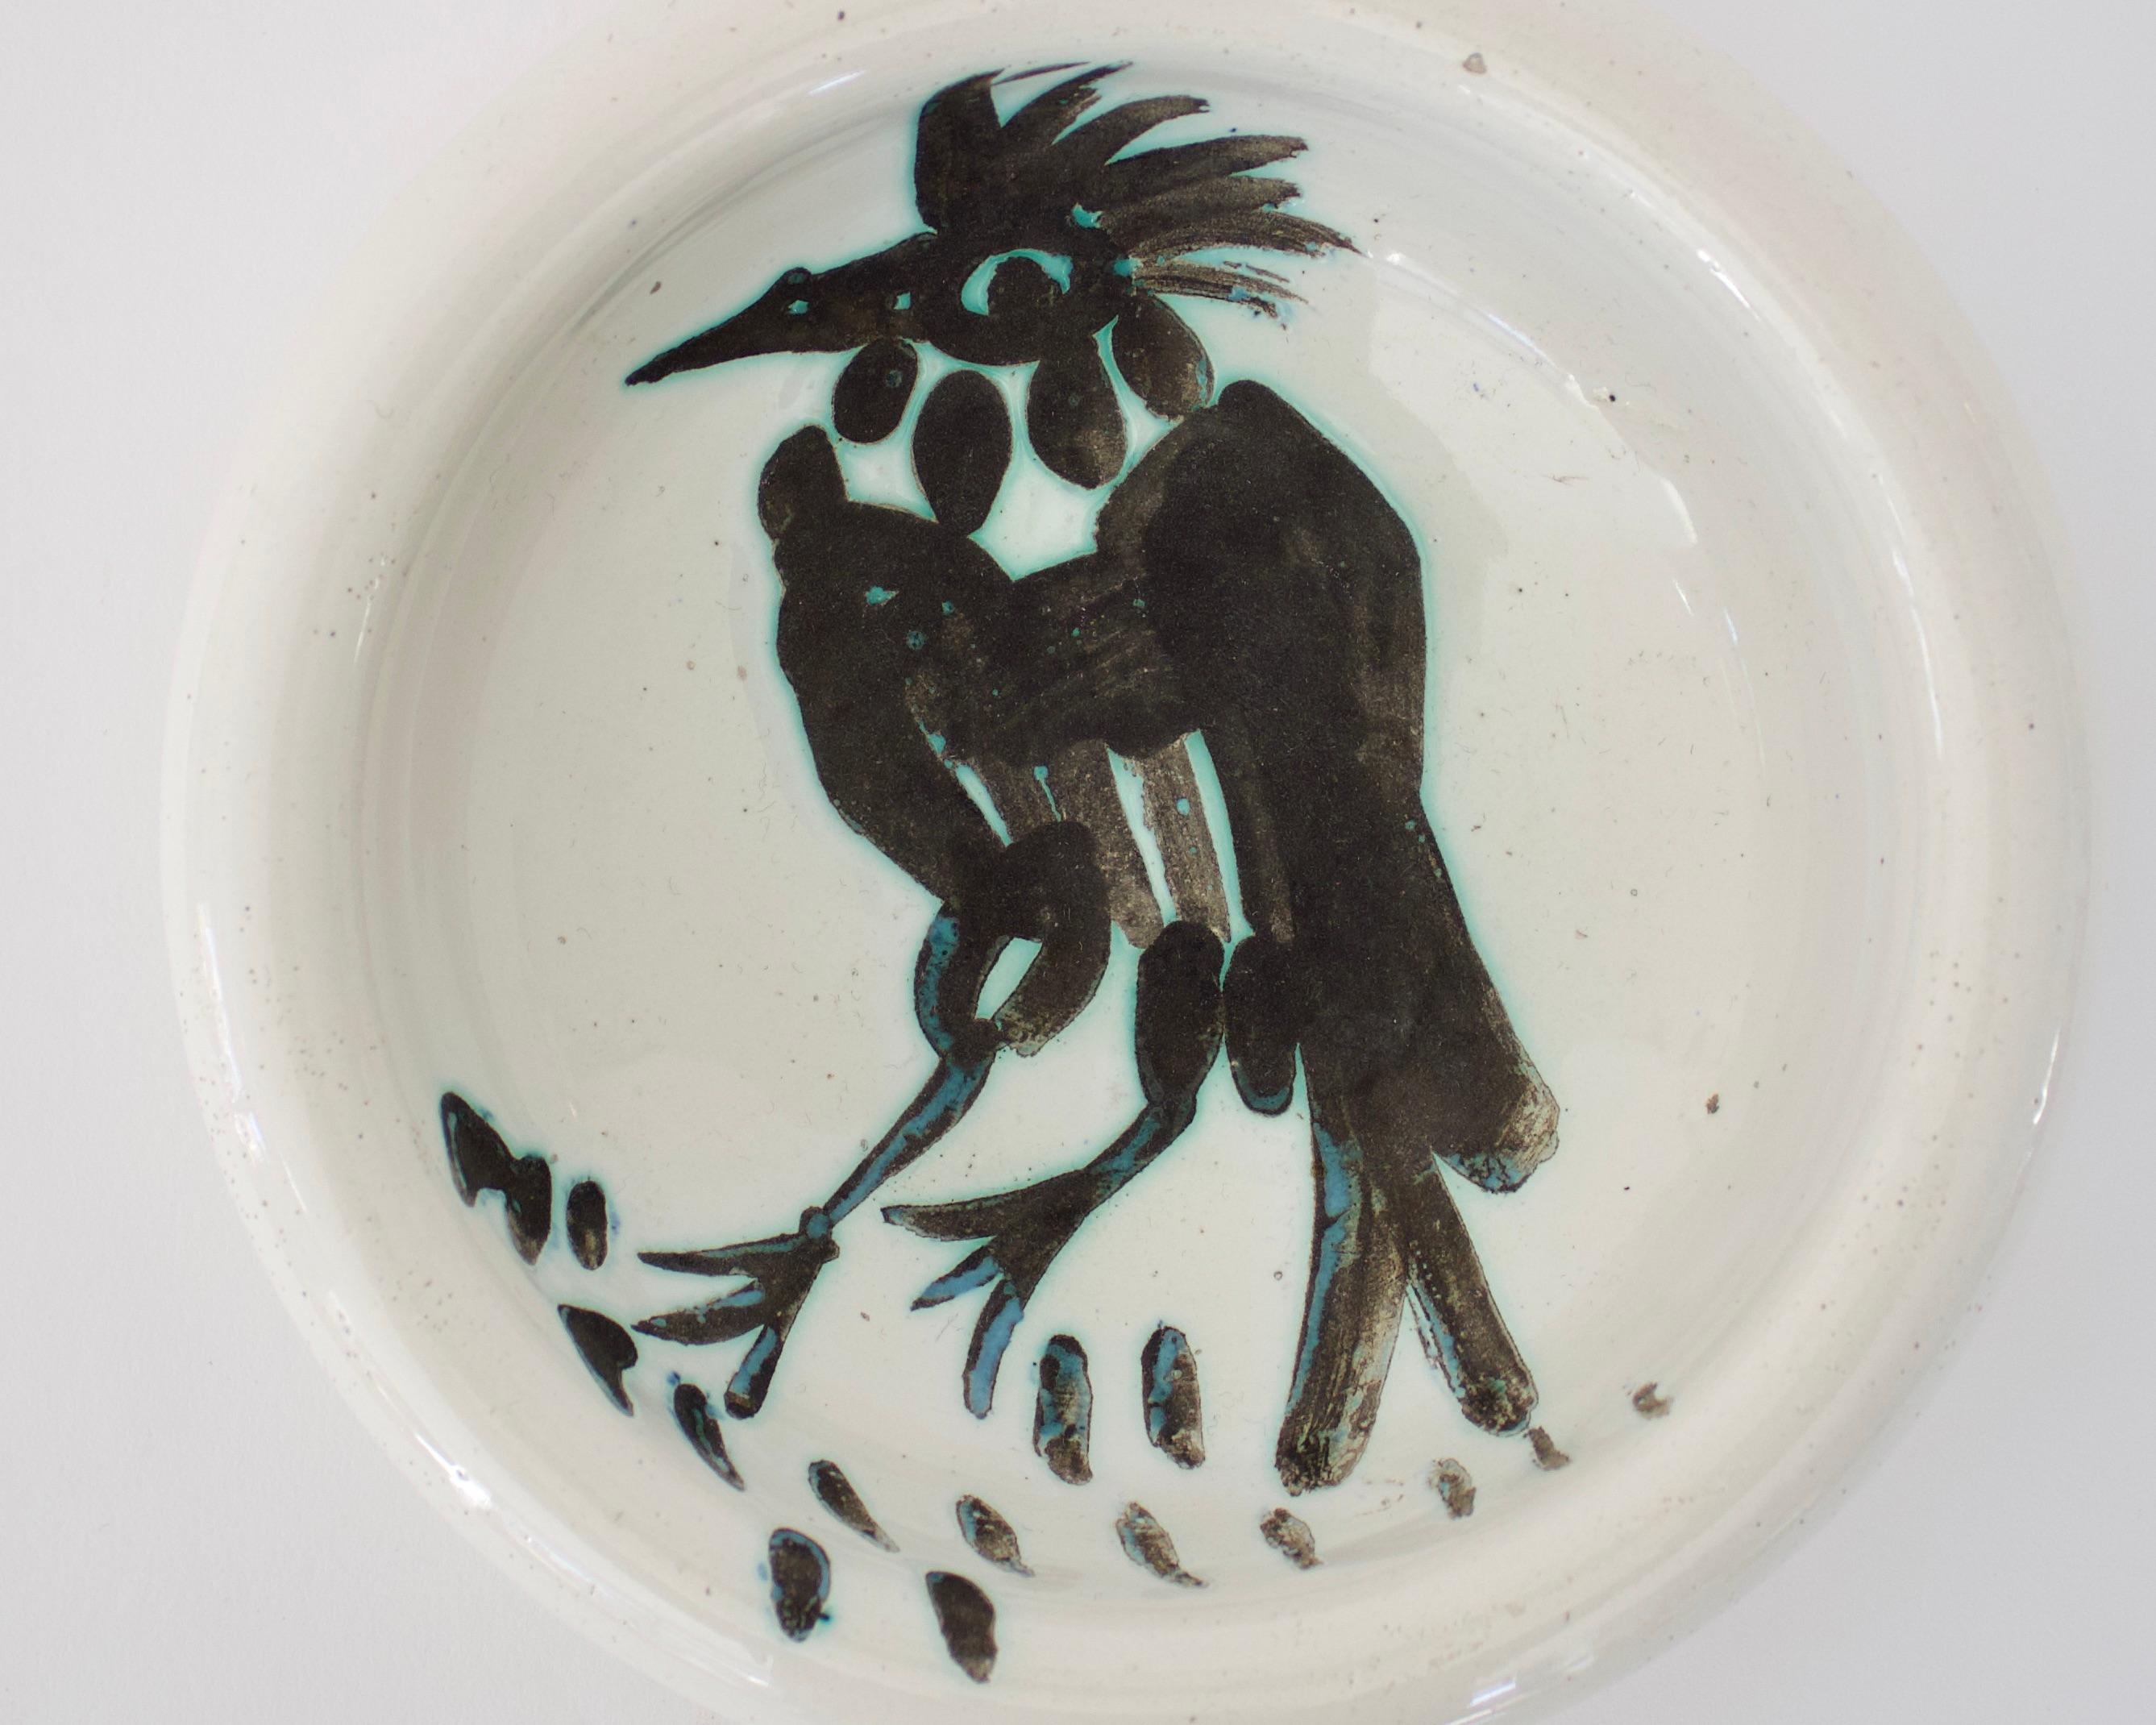 Pablo Picasso Oiseau dish bird with tuft and pointy beak, editions Picasso Madoura France, circa 1952. 15 hand painted brush strokes under the birds feet referring to food. 
Impressed with mark to underside Madoura Plein Feu edition Picasso and